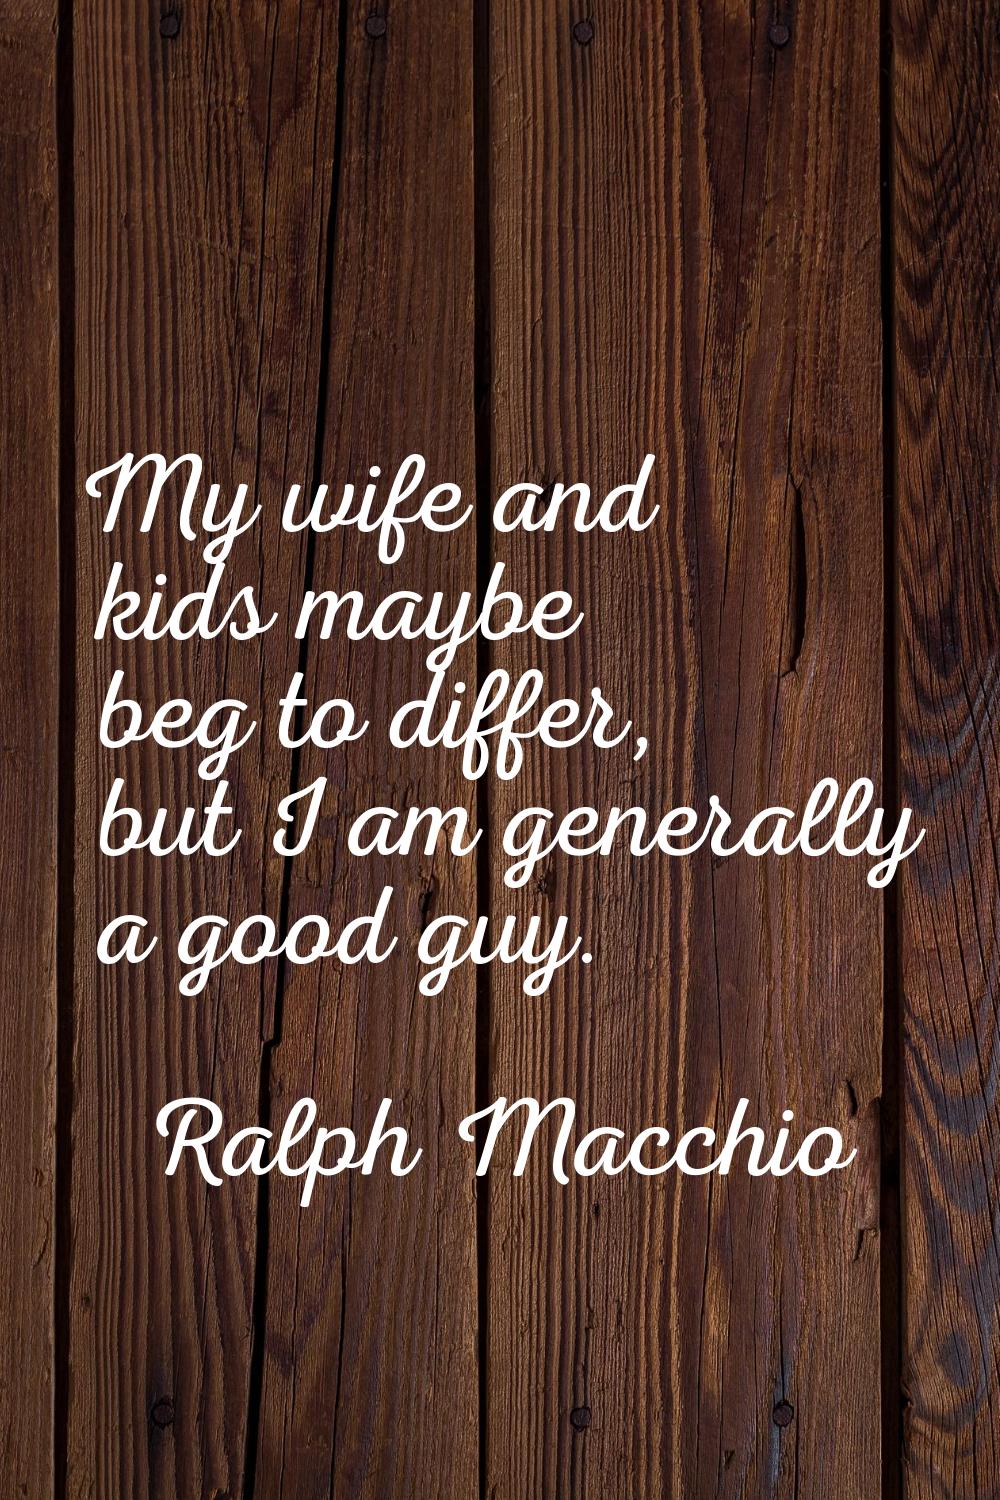 My wife and kids maybe beg to differ, but I am generally a good guy.